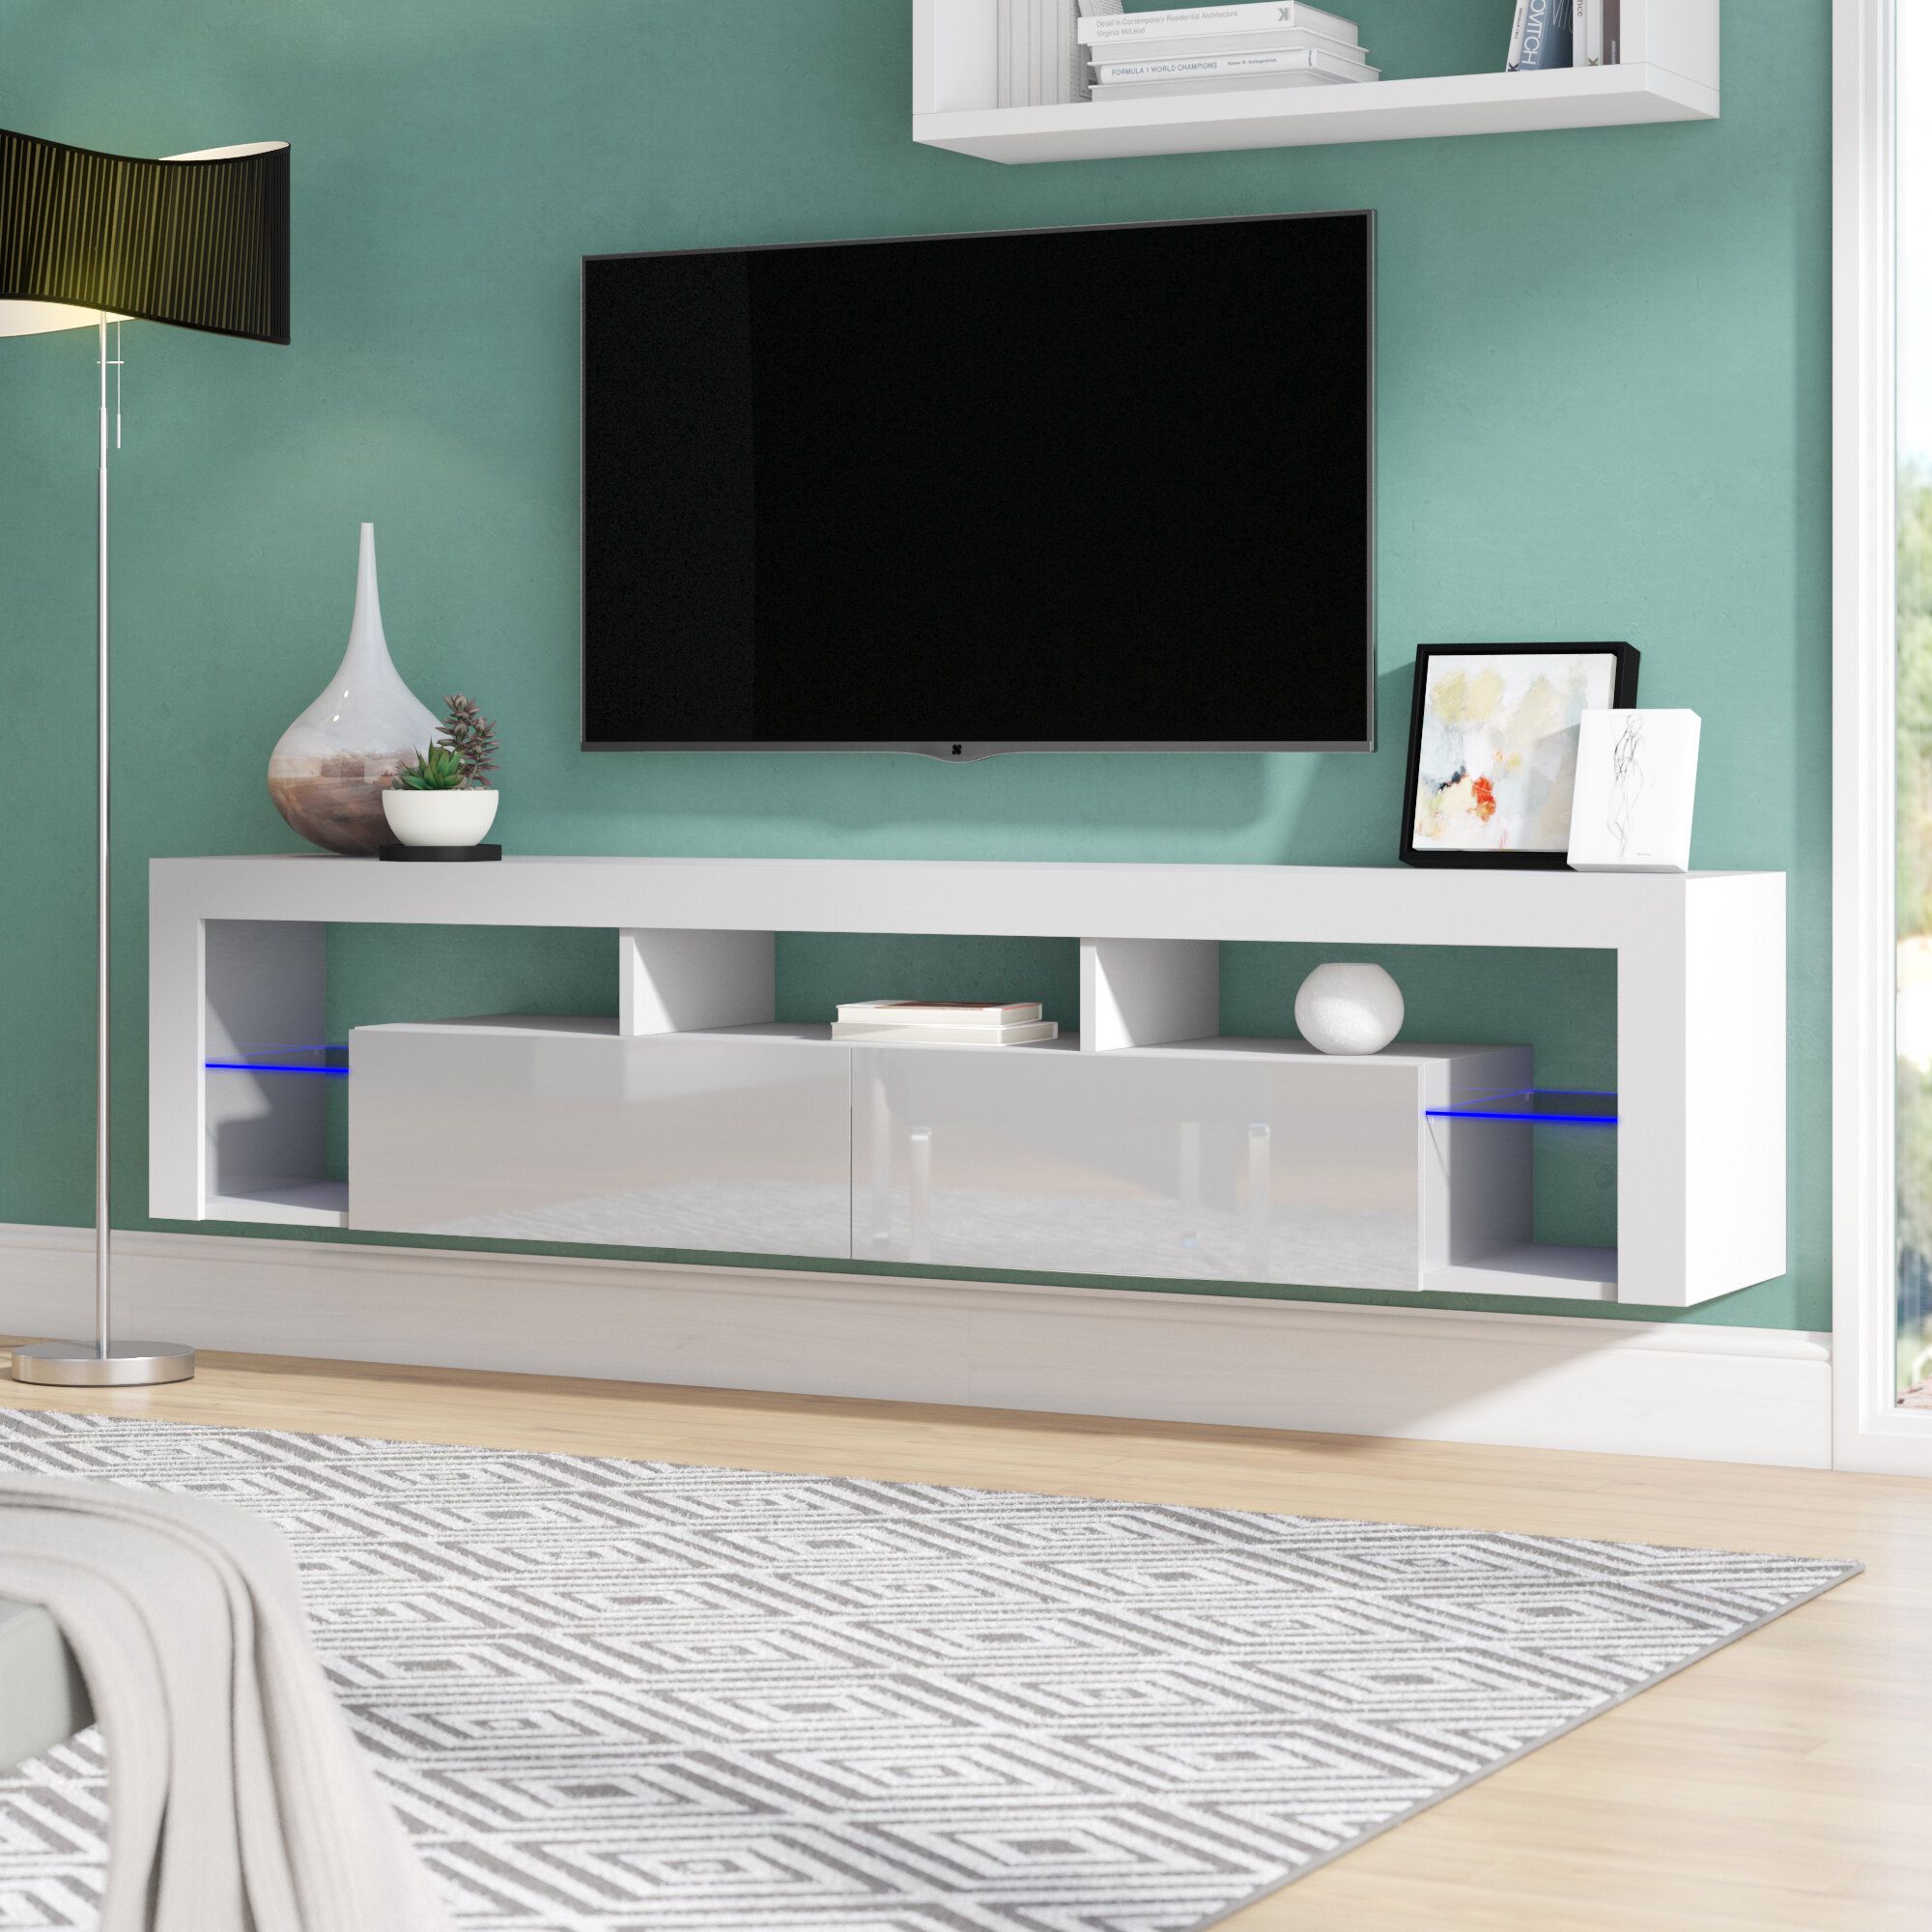 Orren Ellis Floating Milano Tv Stand For Tvs Up To 90" & Reviews | Wayfair In Floating Stands For Tvs (View 12 of 15)